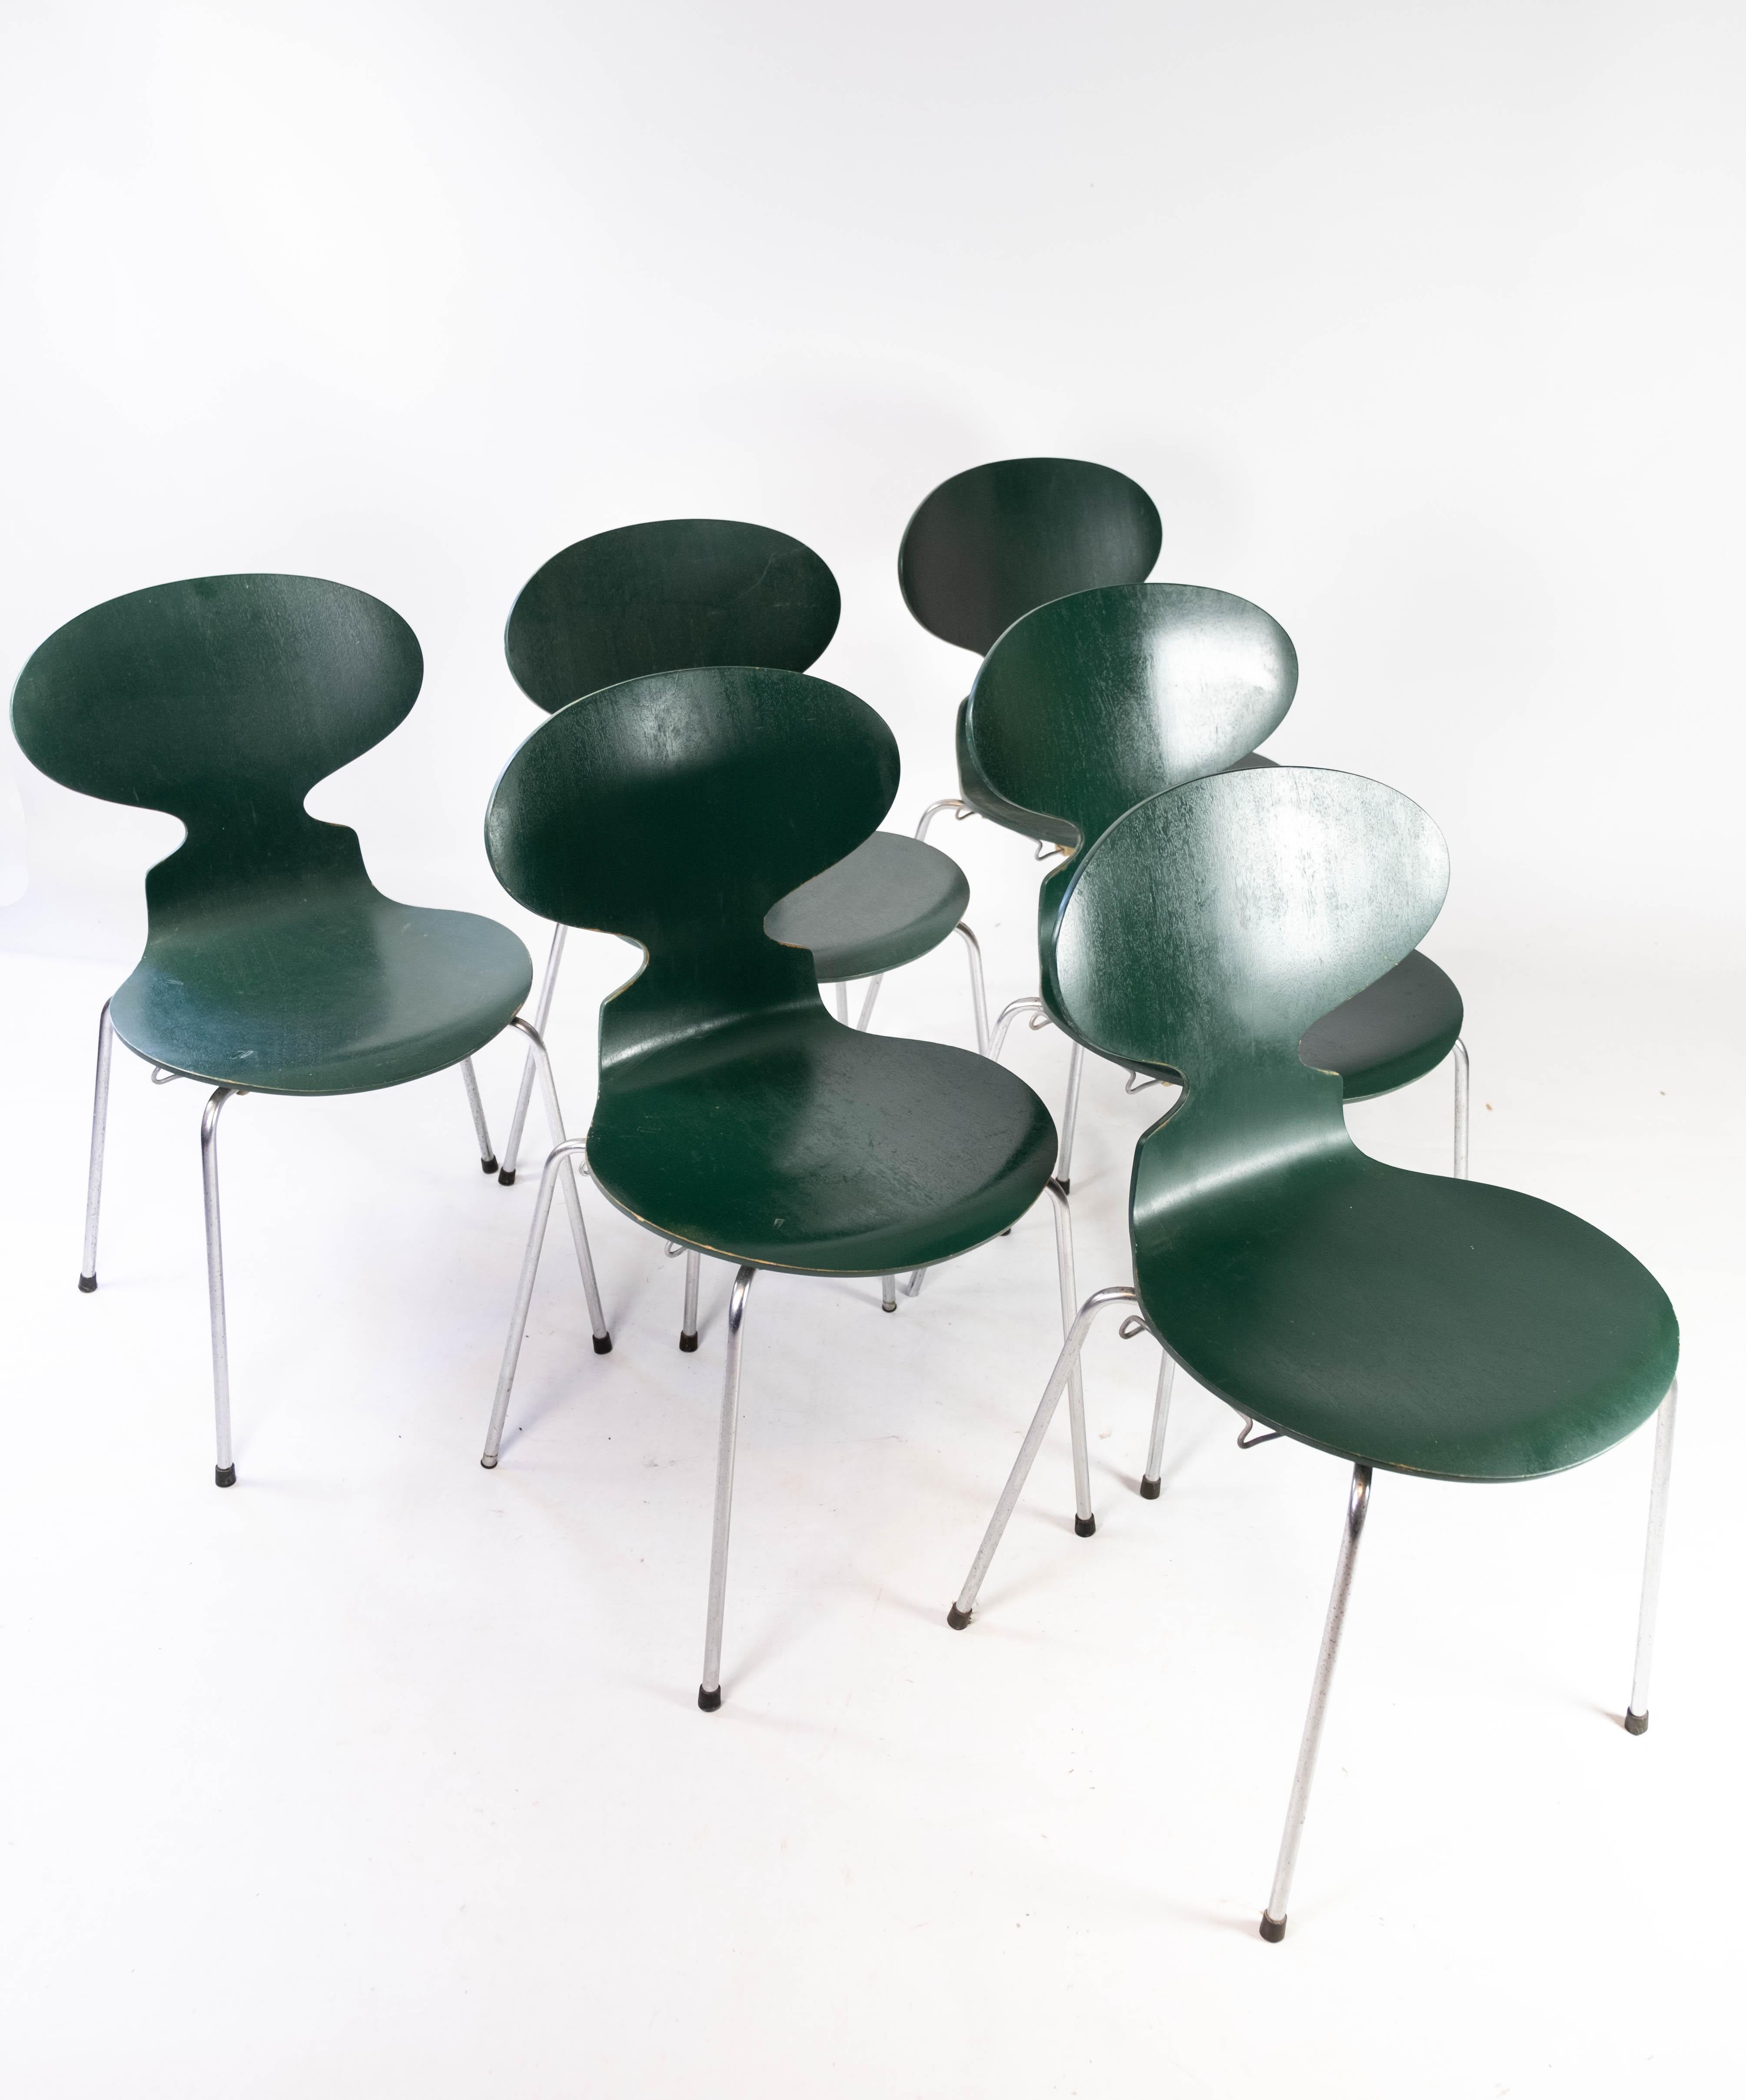 Mid-20th Century Set of Five Dark Green Ant Chairs, Model 3101, Designed by Arne Jacobsen, 1960s